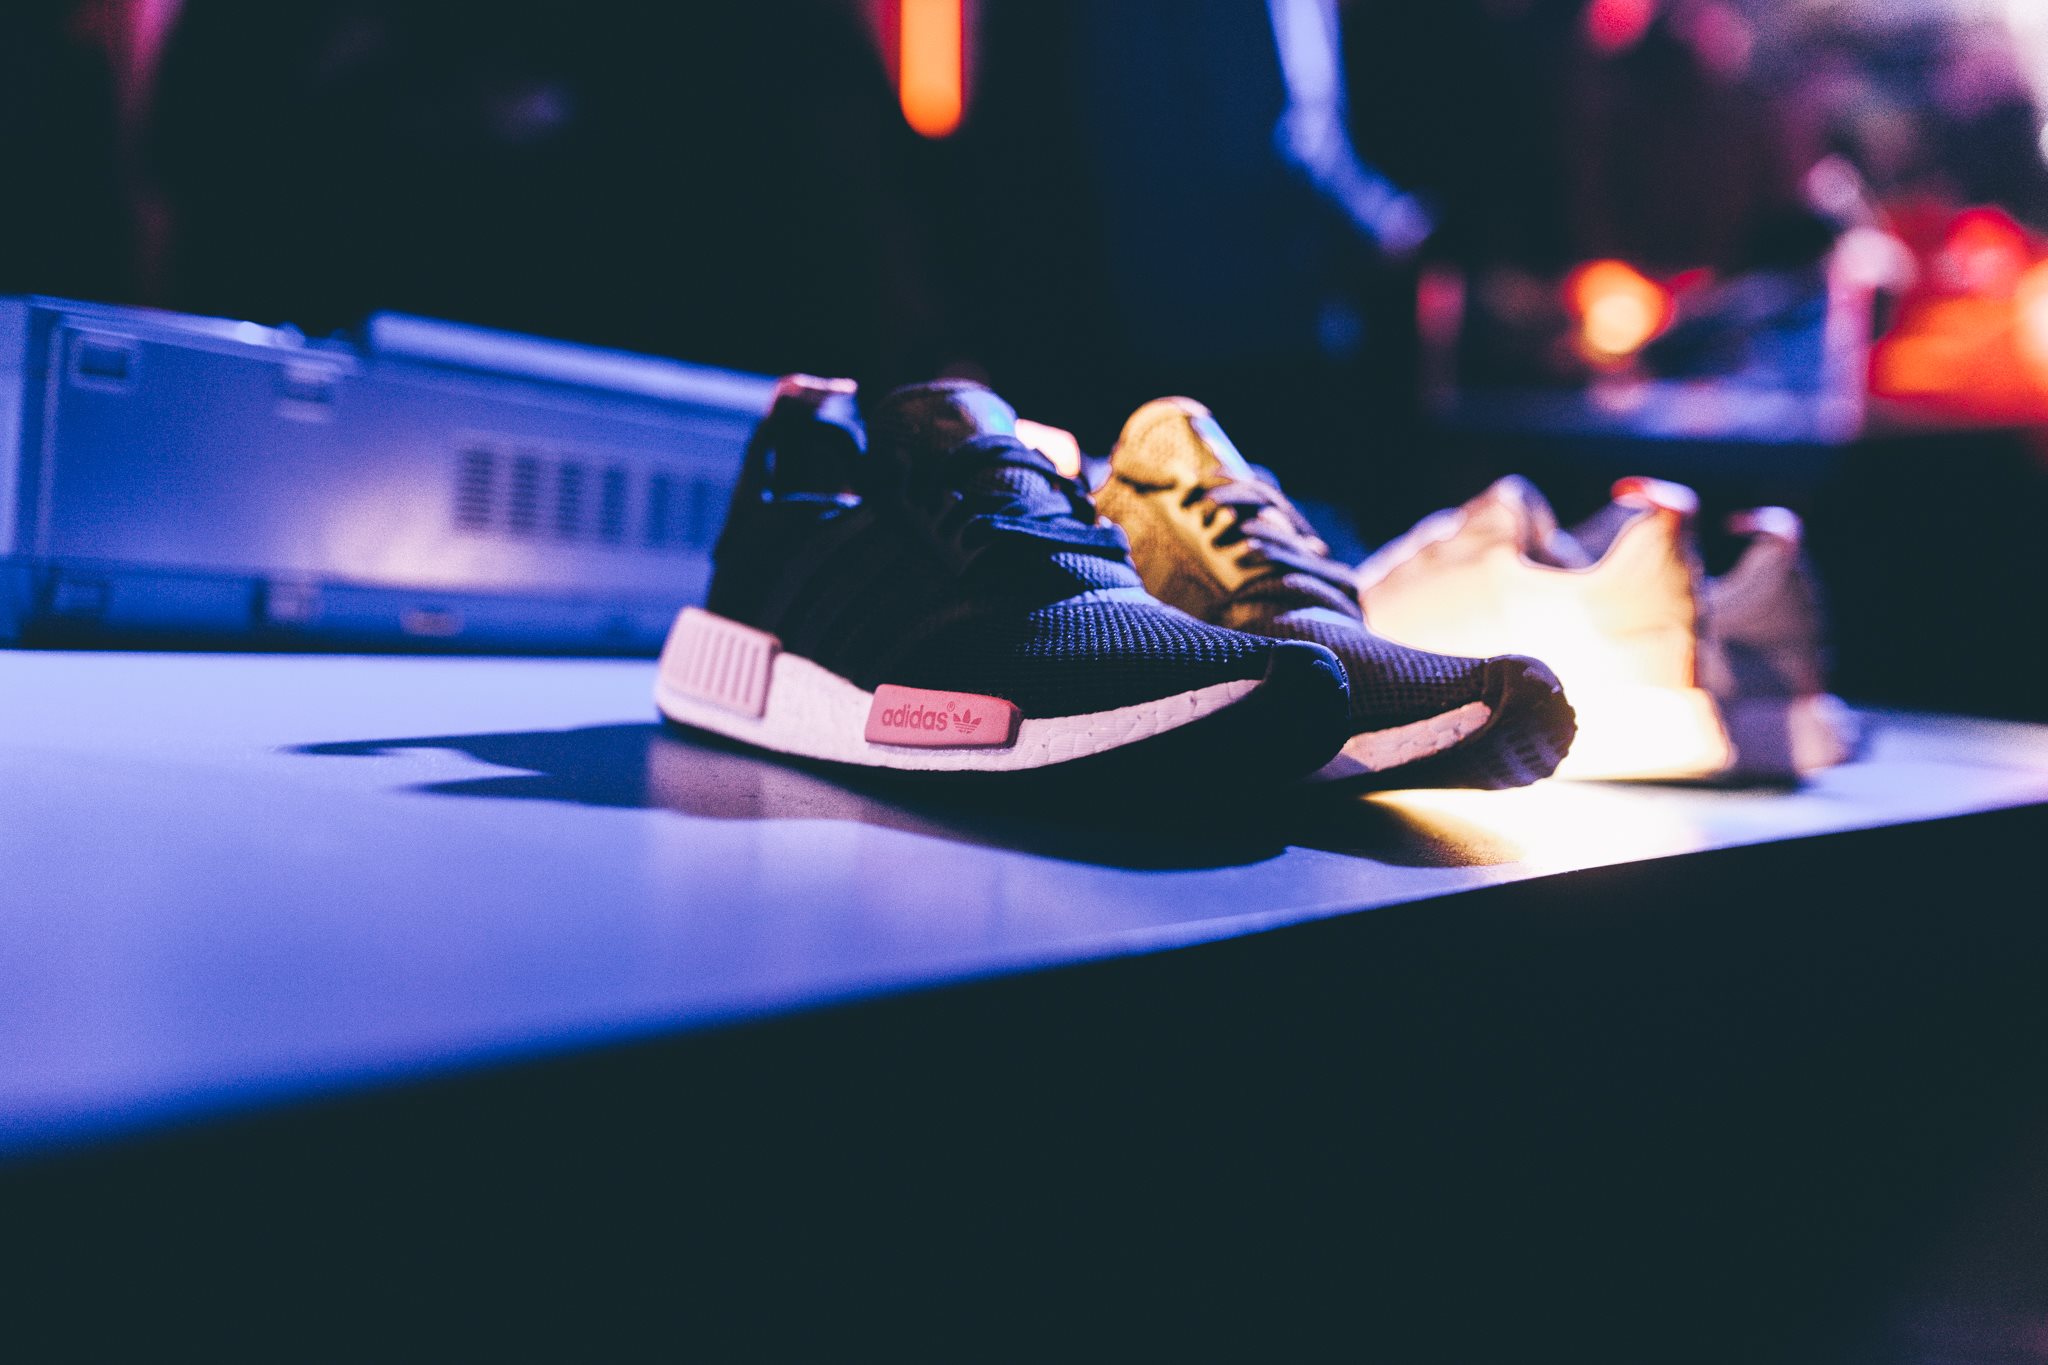 Adidas NMD sneakers launch in Prague • JAD Productions